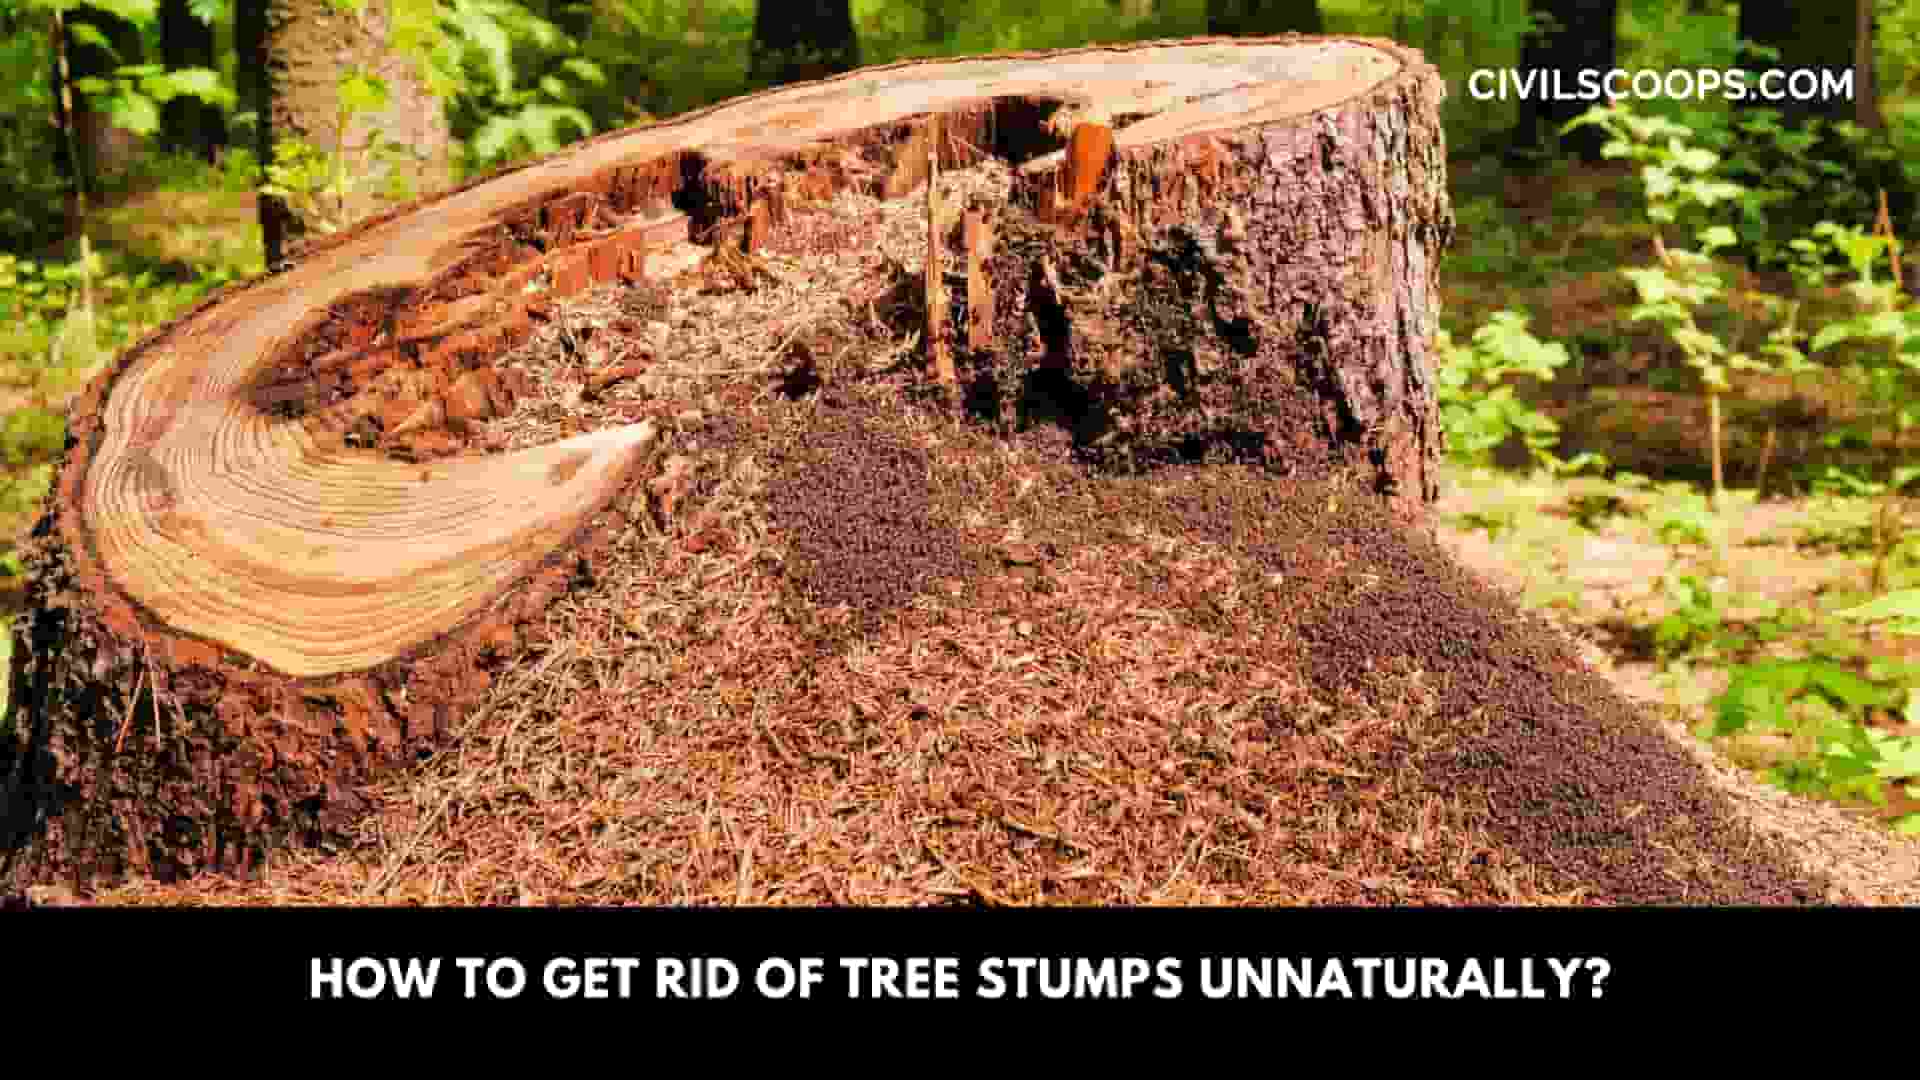 How to Get Rid of Tree Stumps Unnaturally?